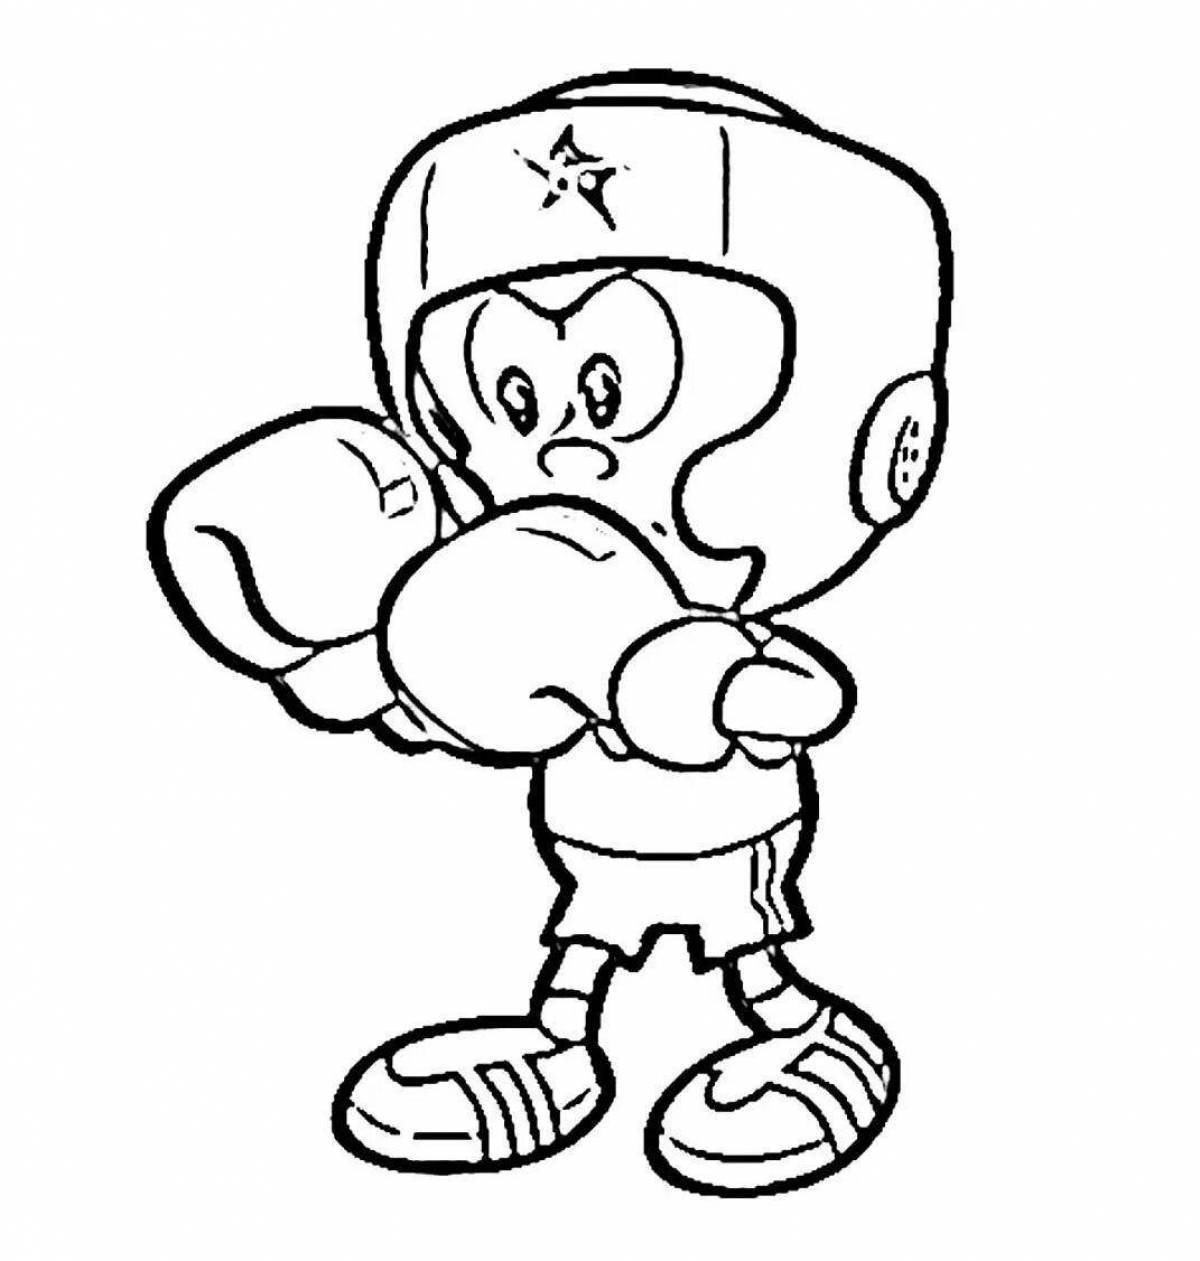 Boxer boo coloring page